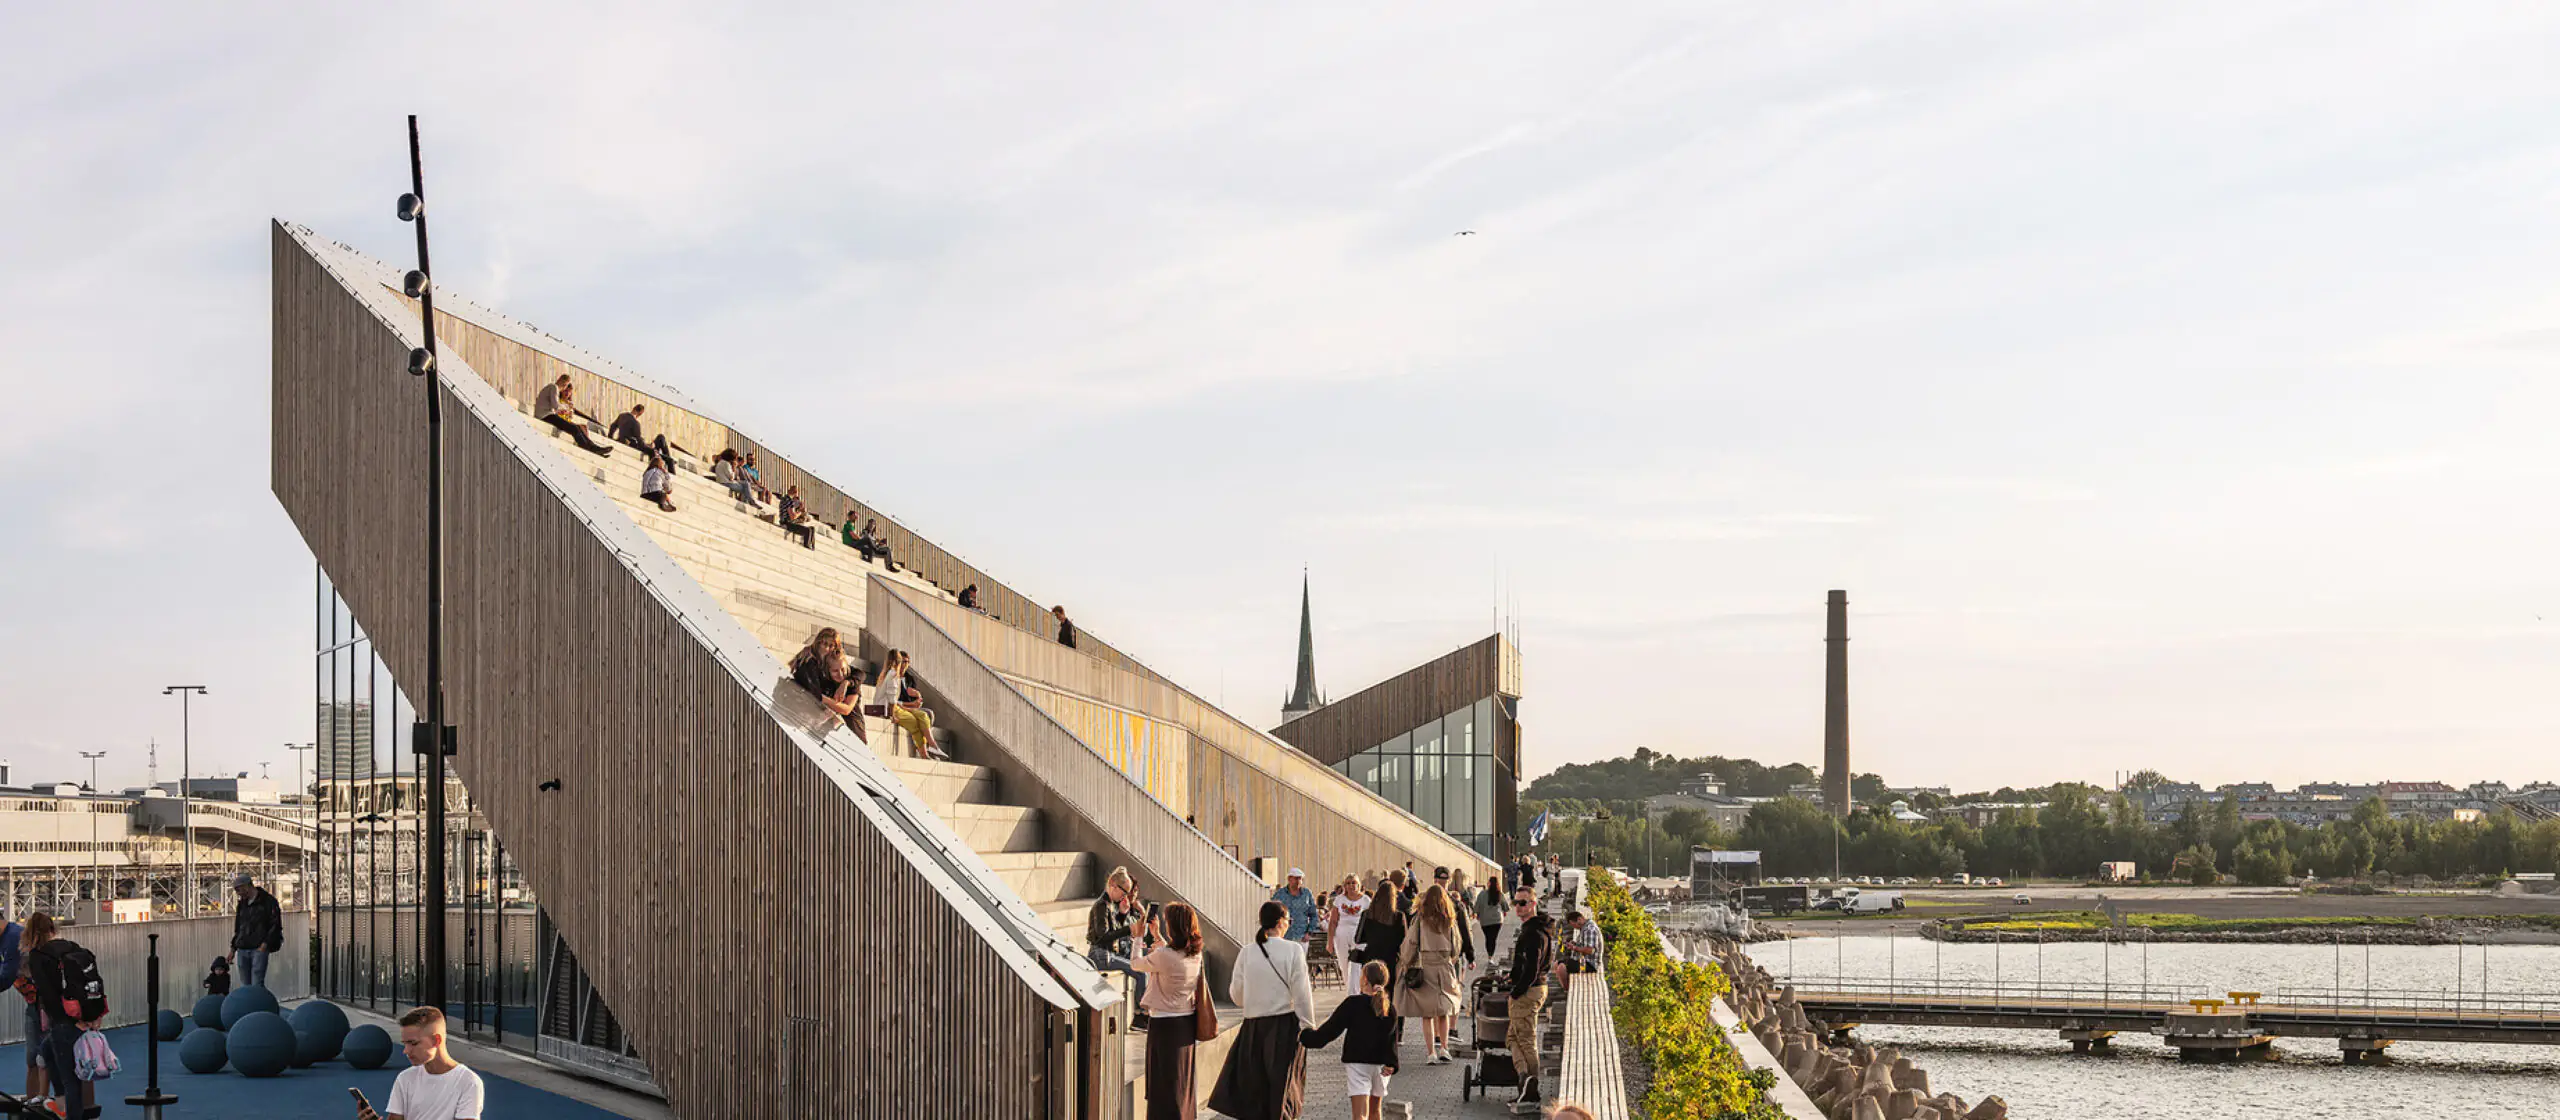 Tallinn’s contemporary architecture: what to see now and in the future